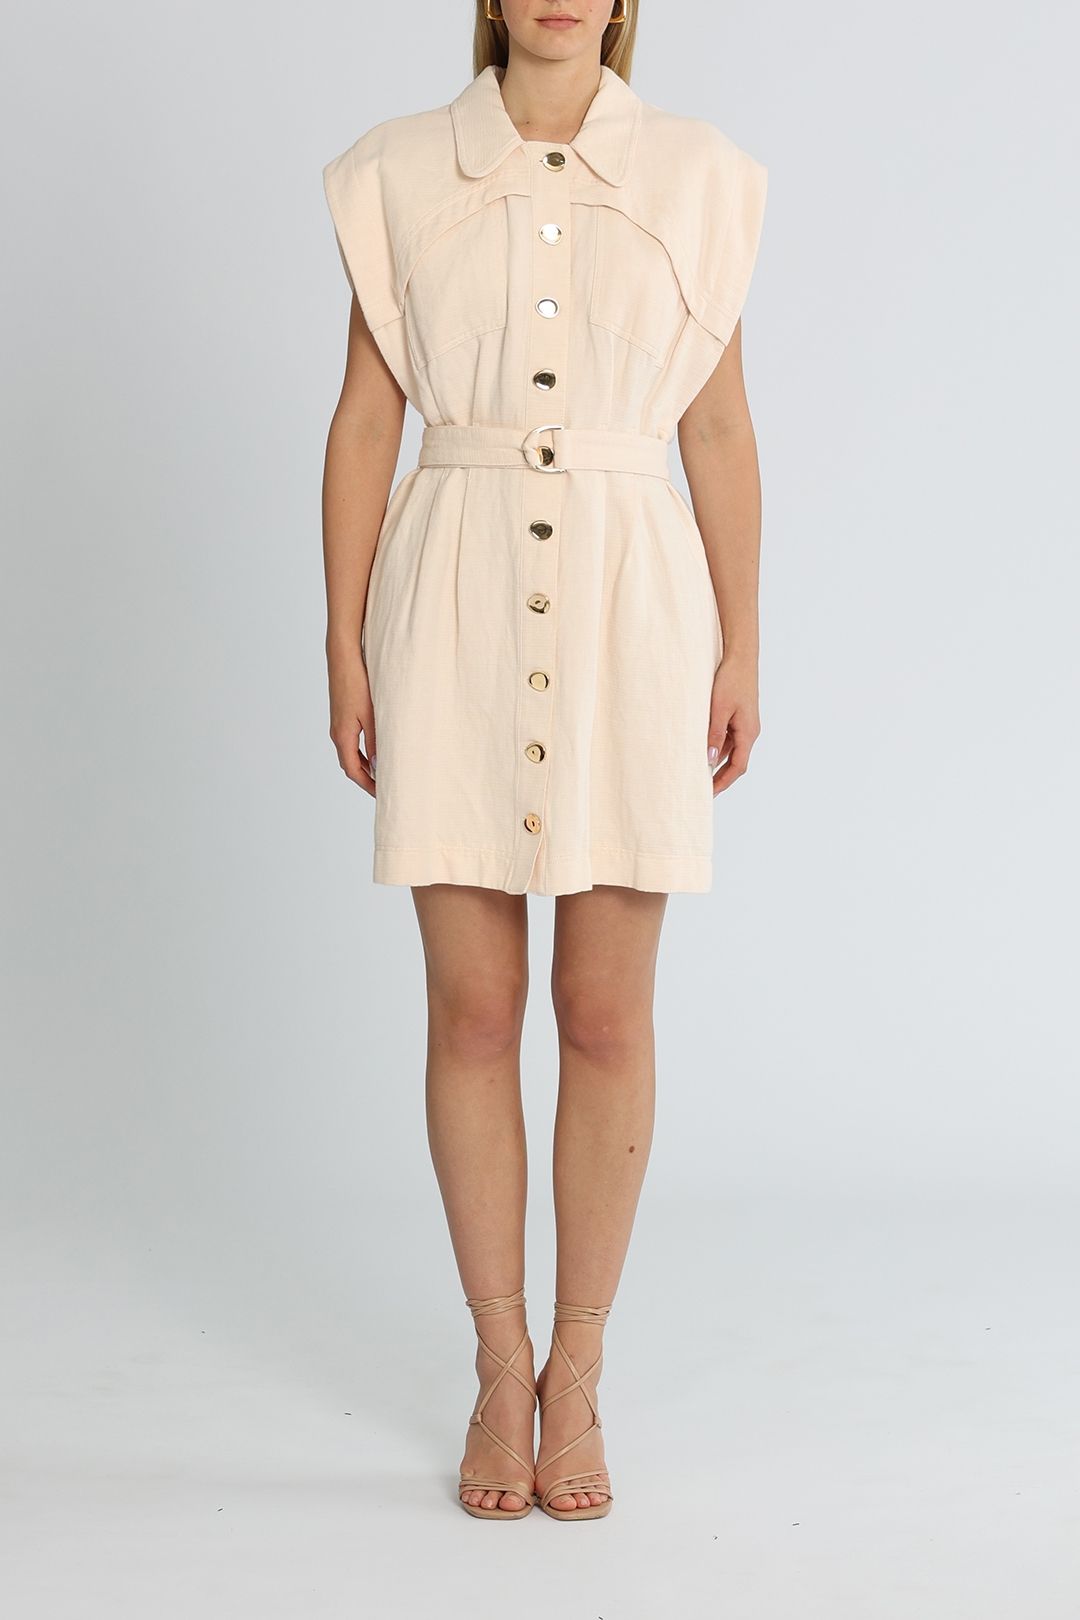 Acler Westcroft Dress in Blush